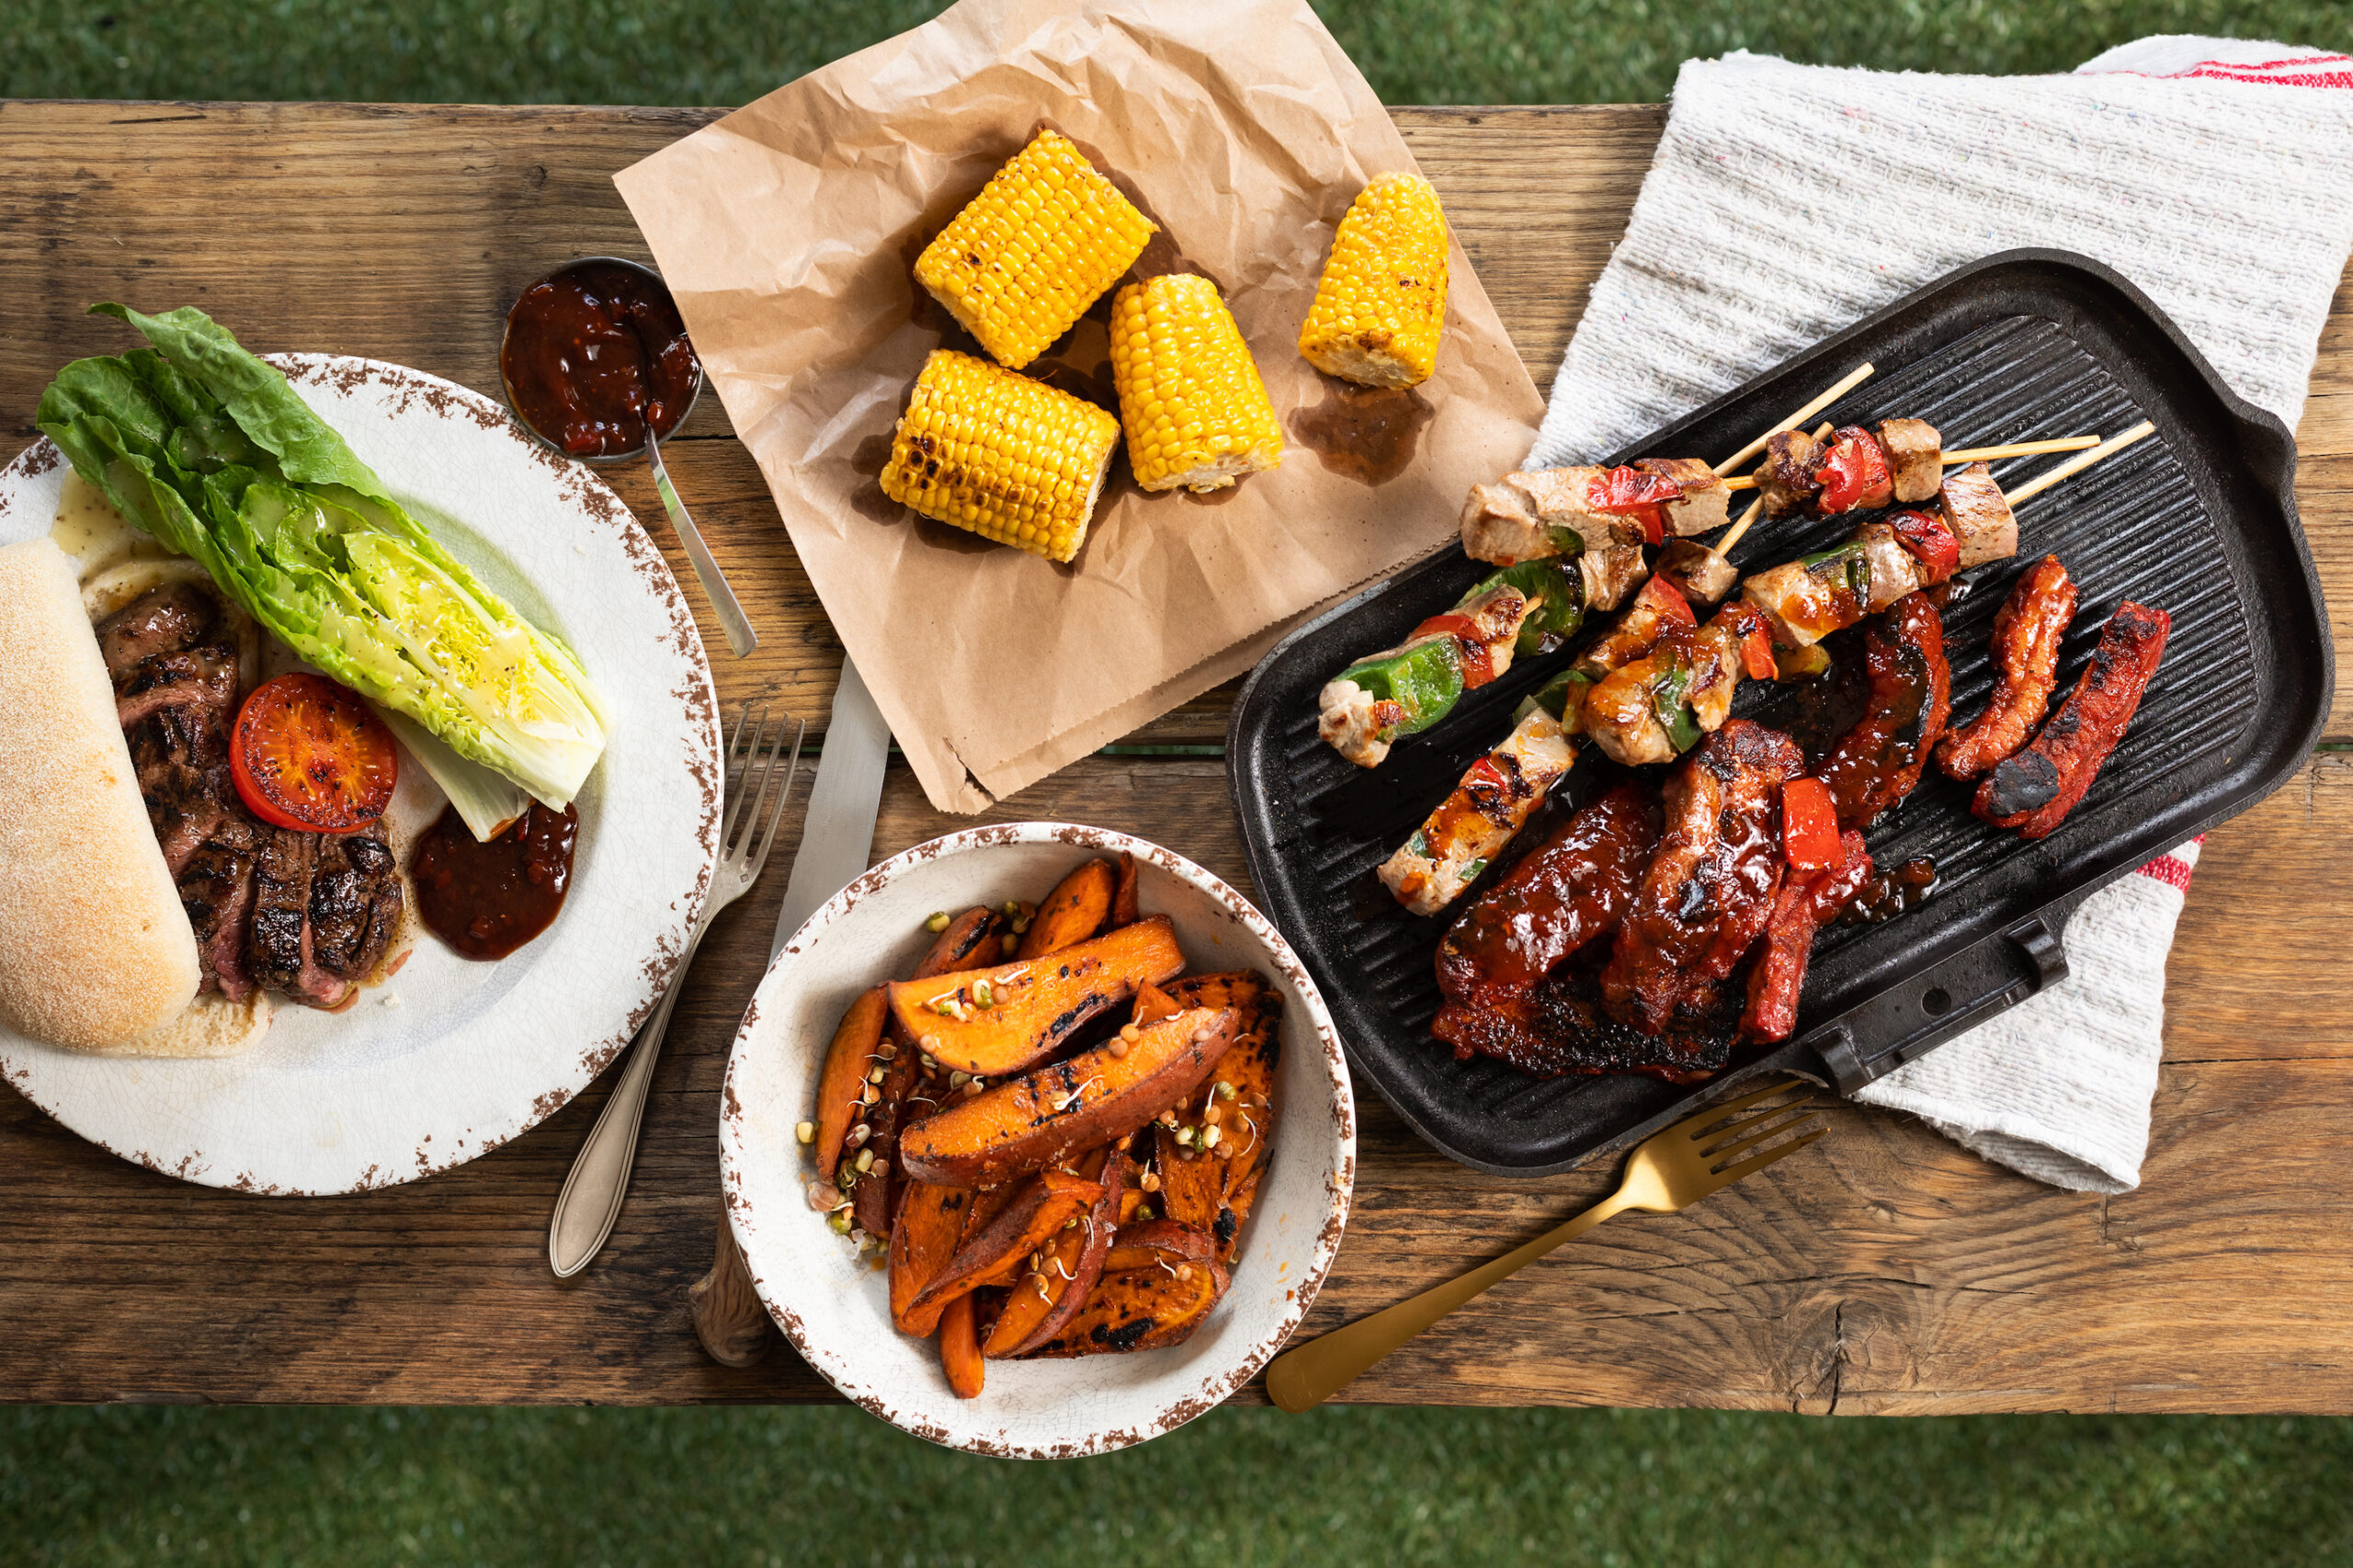 The Crunch BBQ Food Trends Kara Foodservice Food Trends